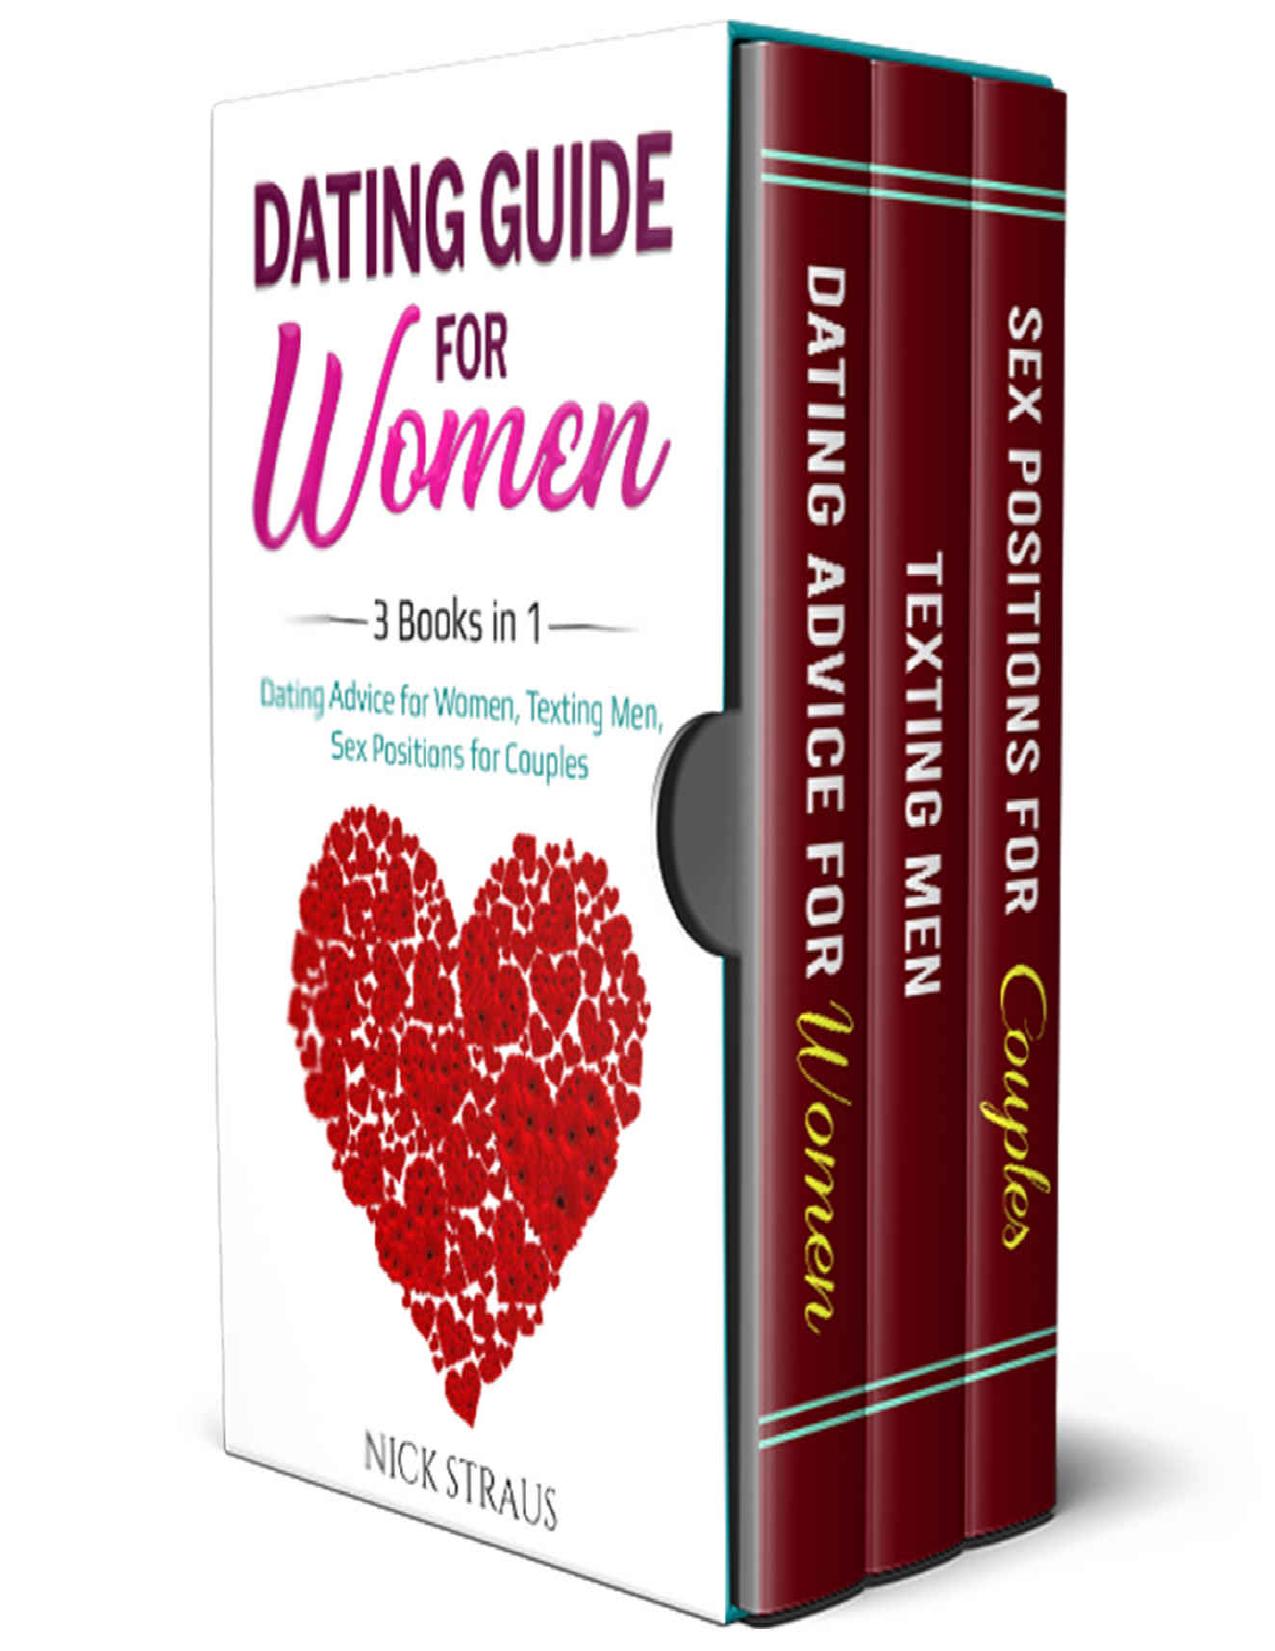 Dating Guide for Women: 3 Books in 1: Dating Advice for Women, Texting Men, Sex Positions for Couples (Mars & Venus Book 4) by Nick Straus